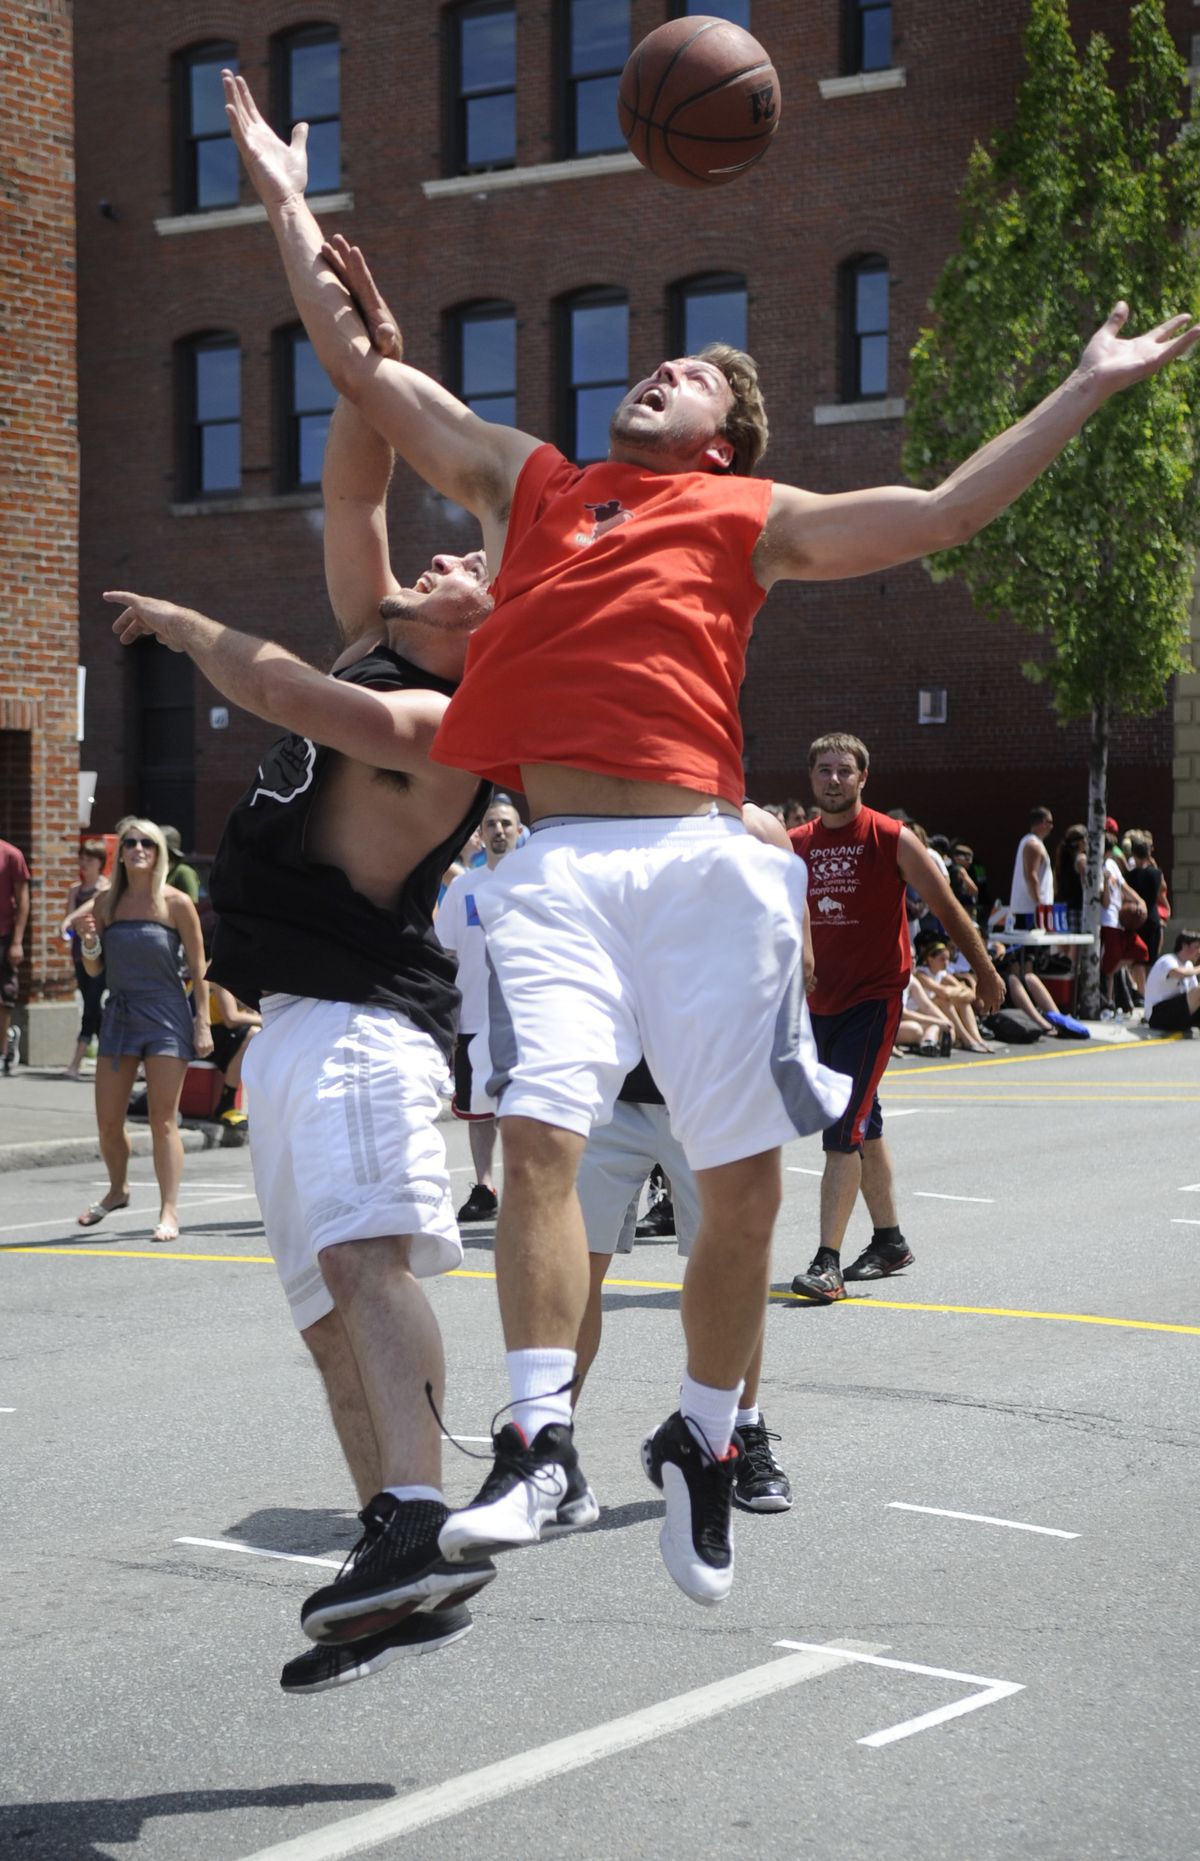 Mike Daffern of the Fish Sticks, left, and Johnny Fredrick of the Bobby Dills compete for a rebound. The Fish Sticks won 16-15 in overtime. (Colin Mulvany)